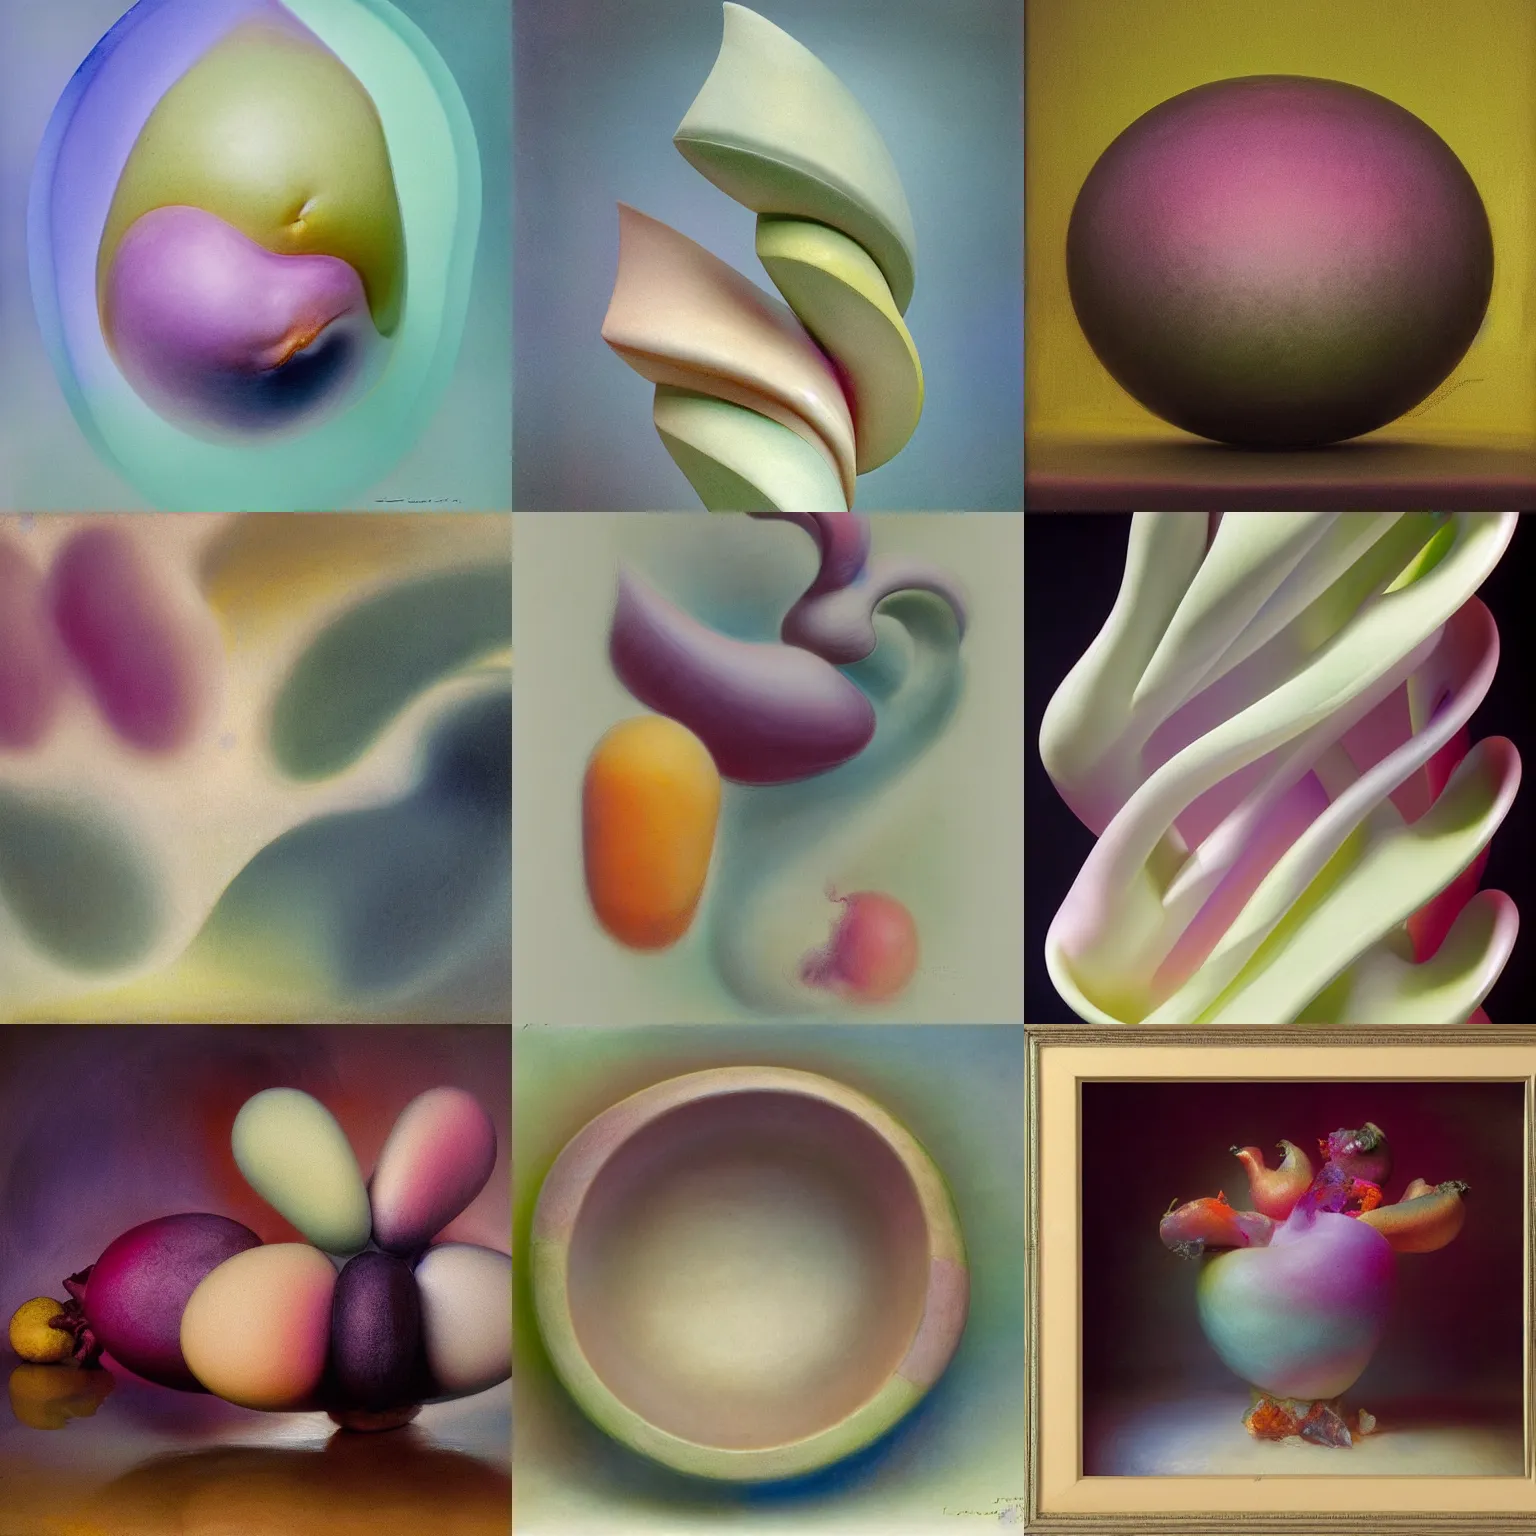 Prompt: one asymmetrical biomorphic form with ombre pastel colors, by thomas moran, professional fruit photography